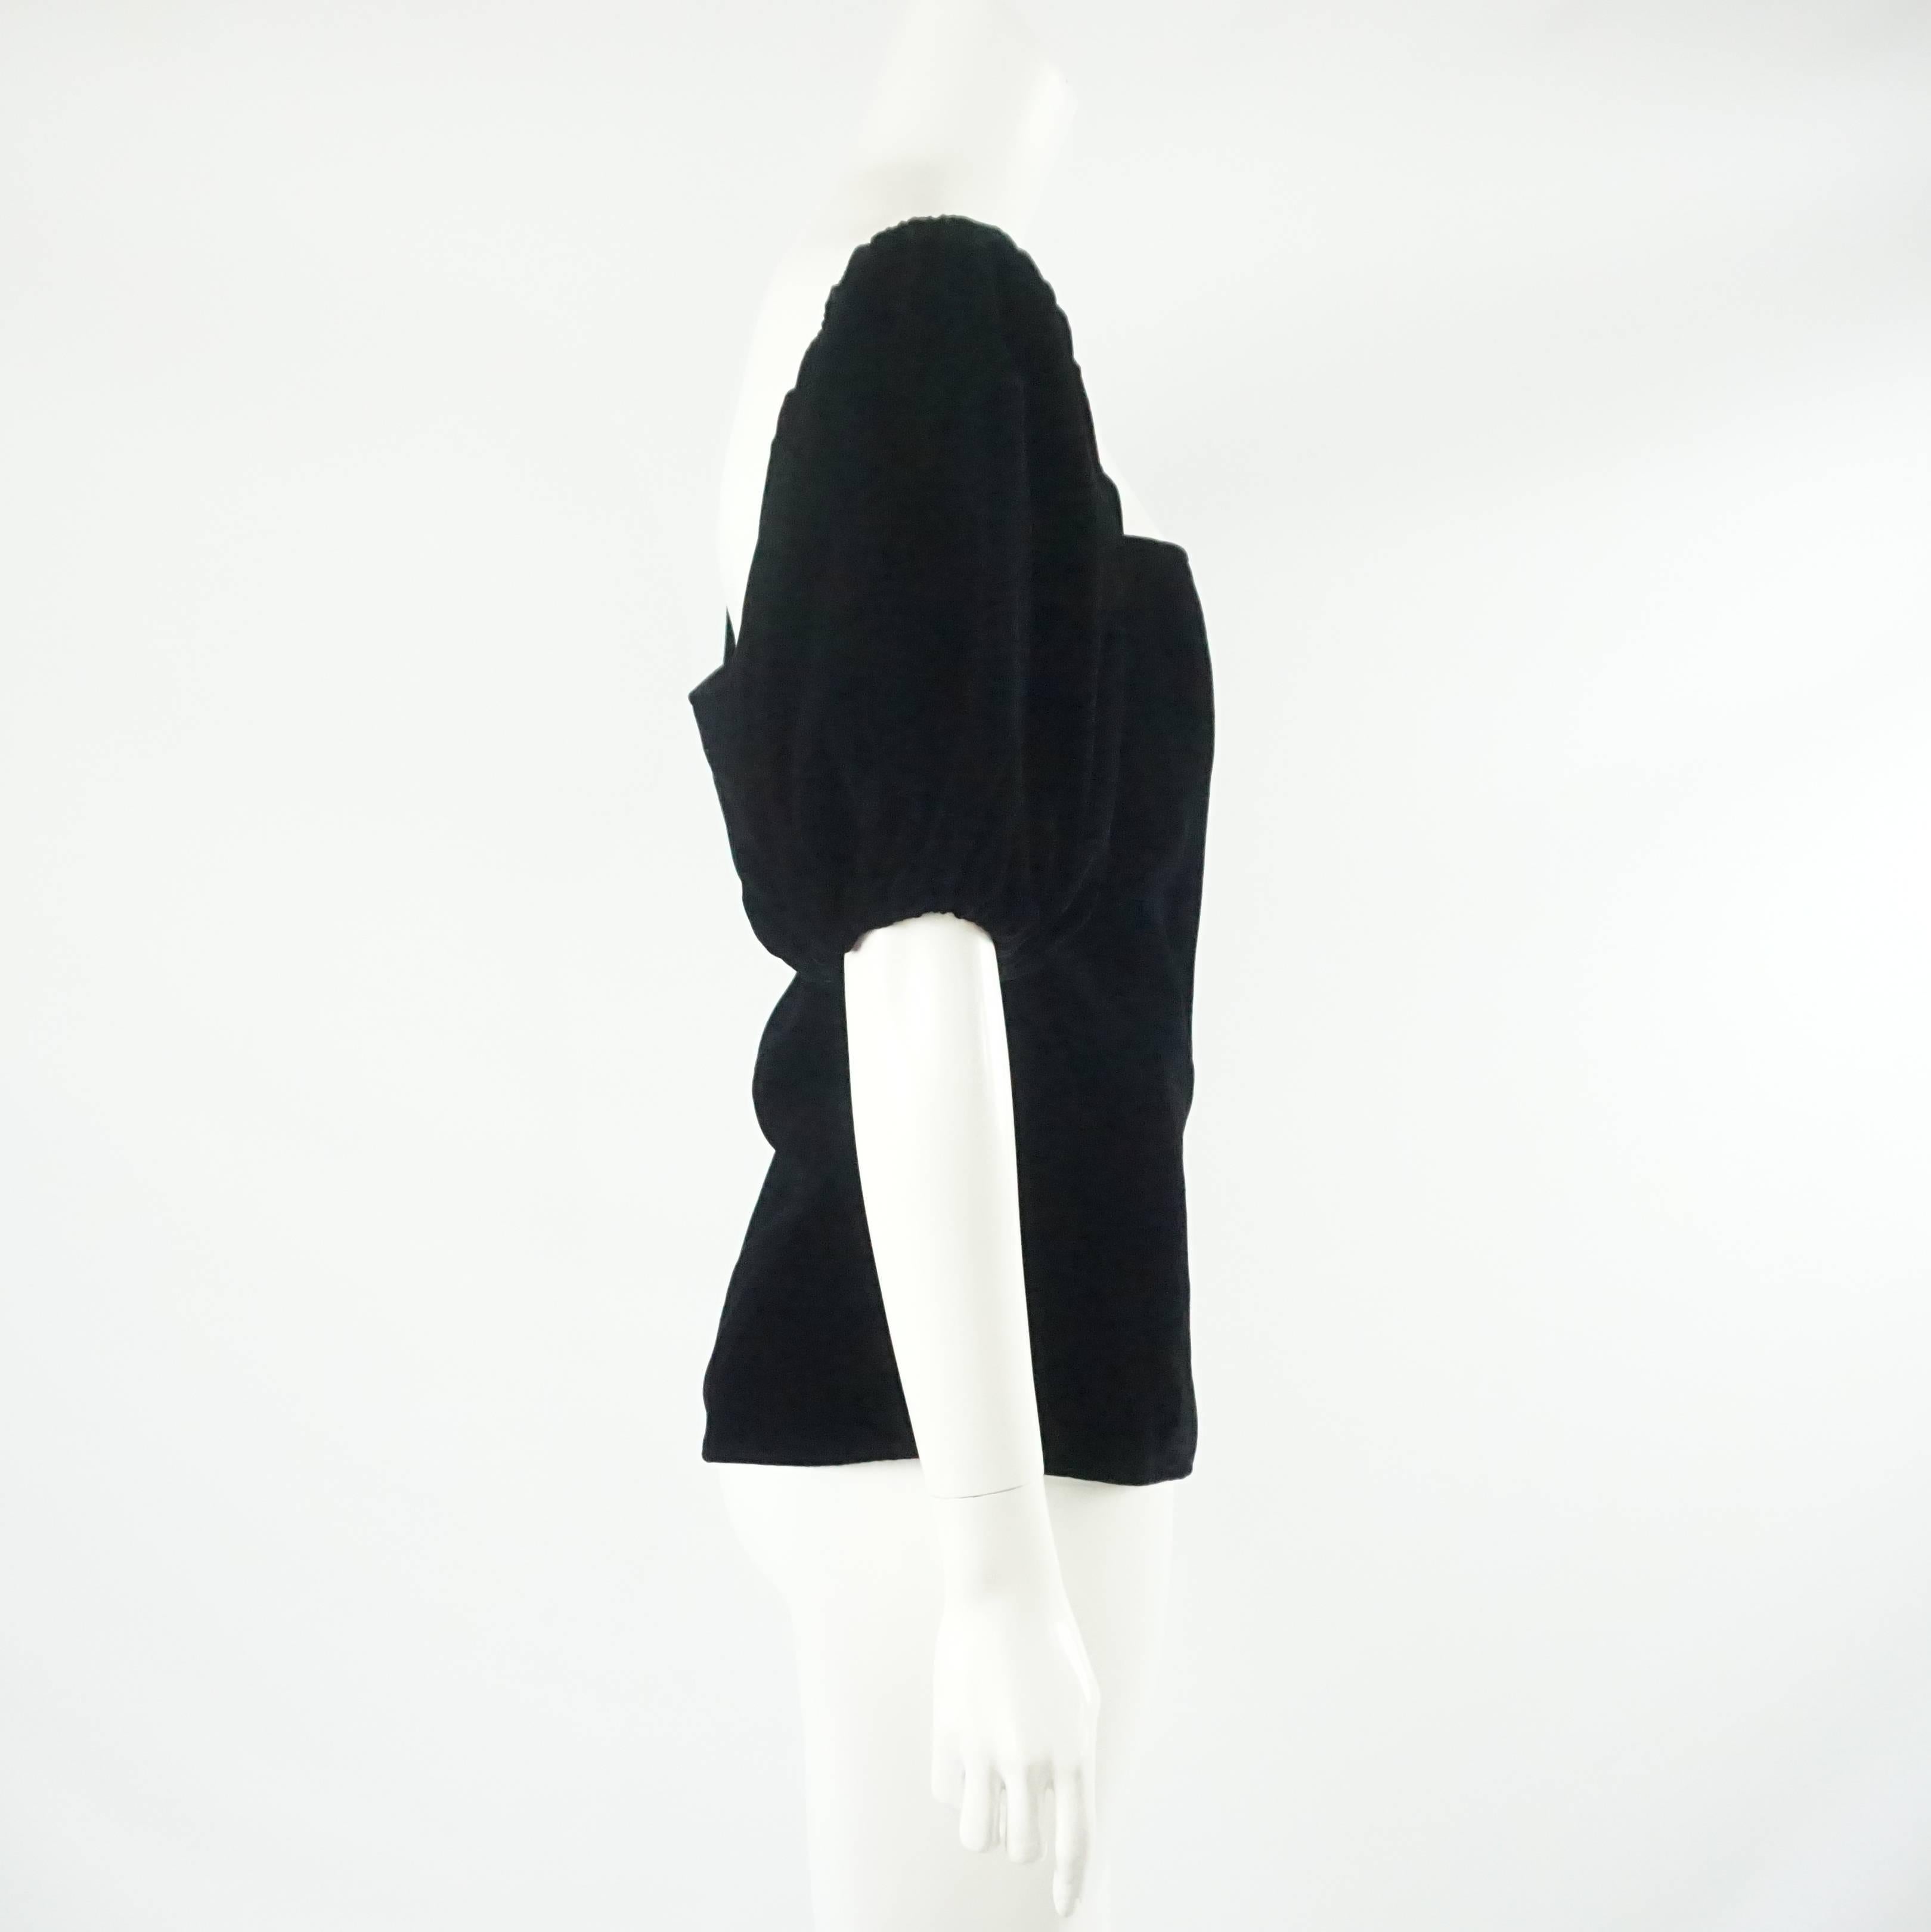 This vintage YSL black velvet top has a straight neckline with puffed elbow length sleeves. The blouse falls mid-back and has a back zipper. It is in fair vintage condition due to inside wear and pressing in the velvet as seen in the last images.